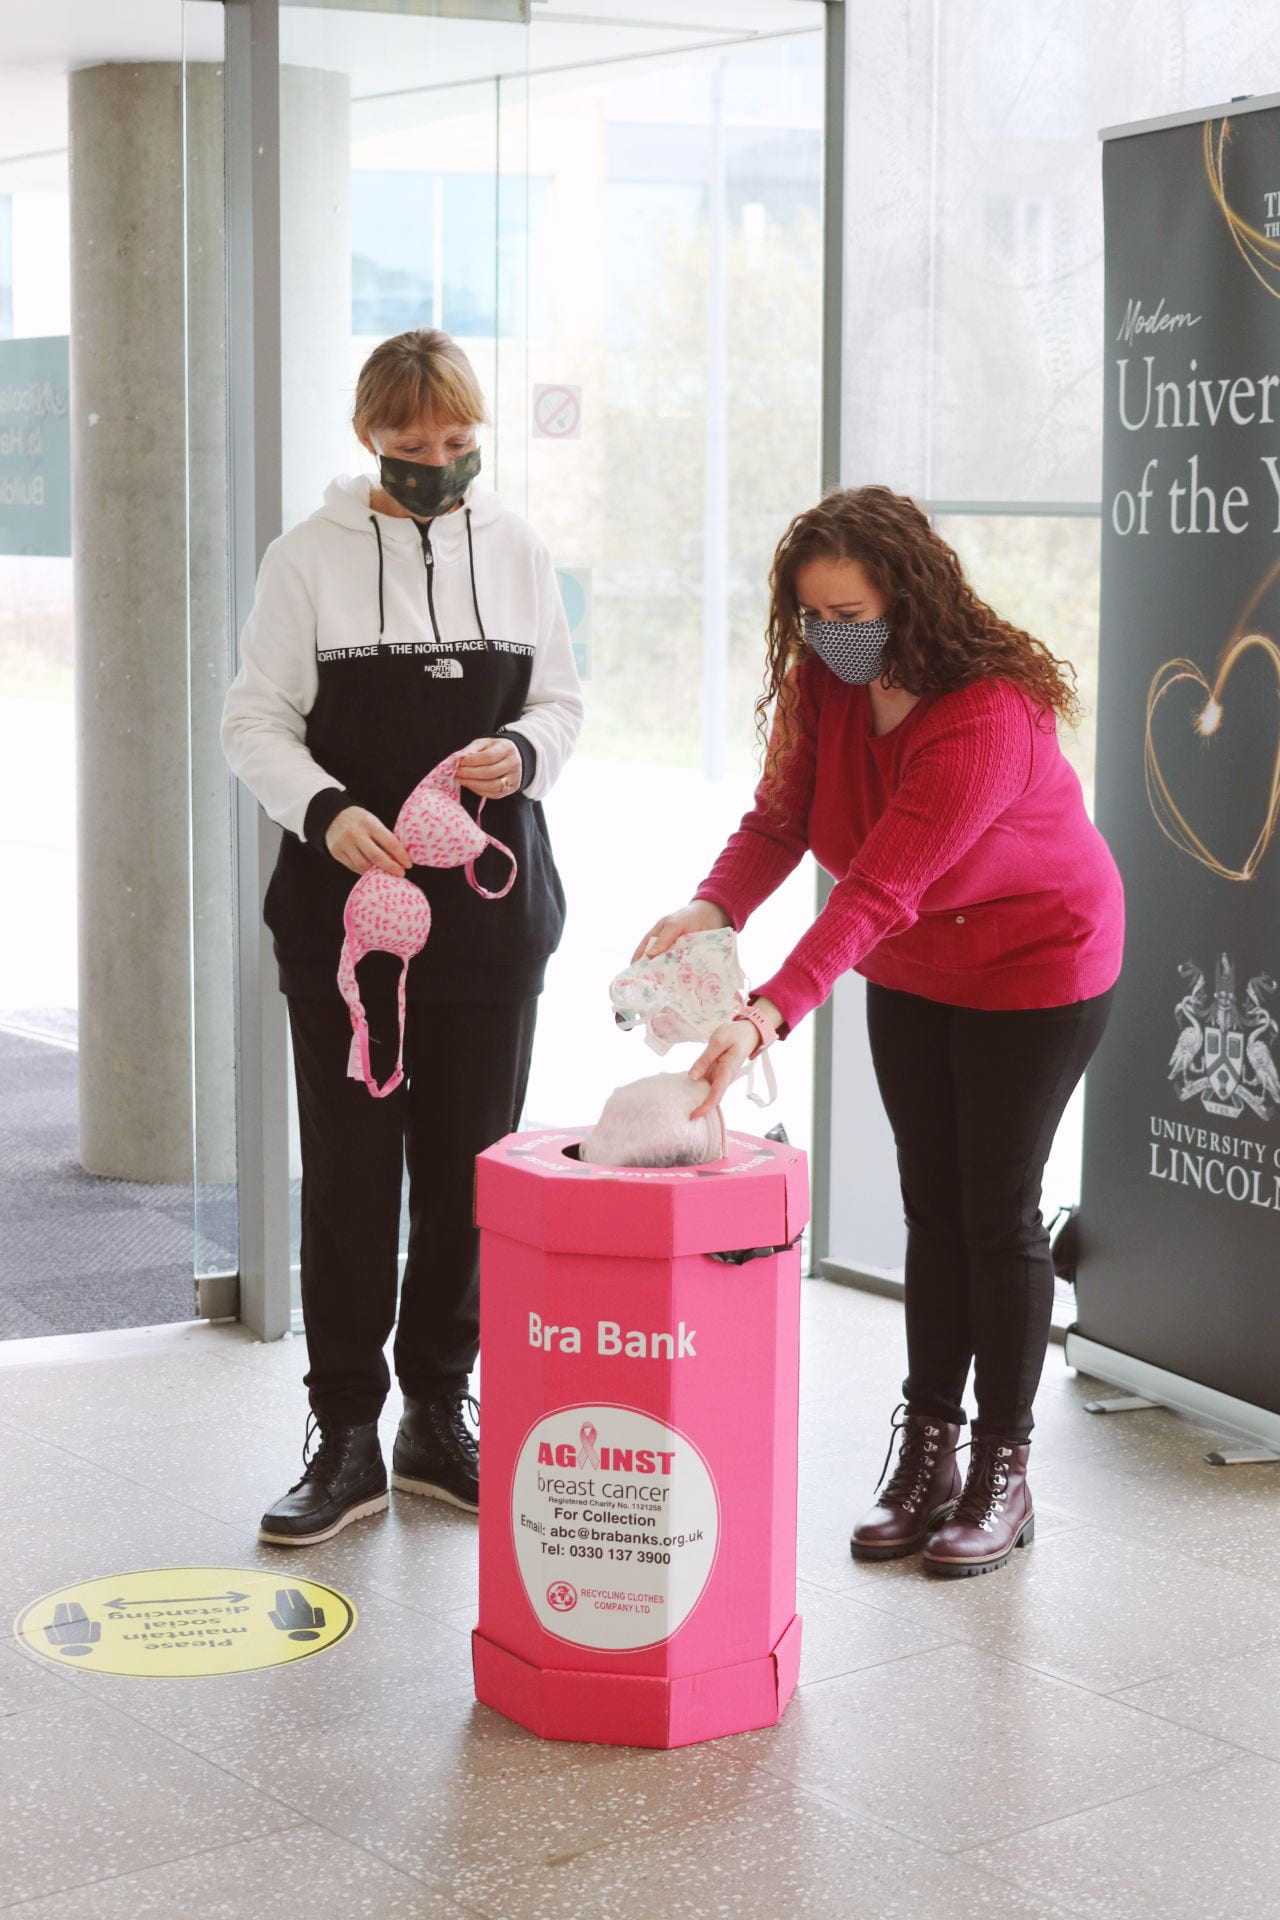 Image of two people putting bras into a pink recycling bin